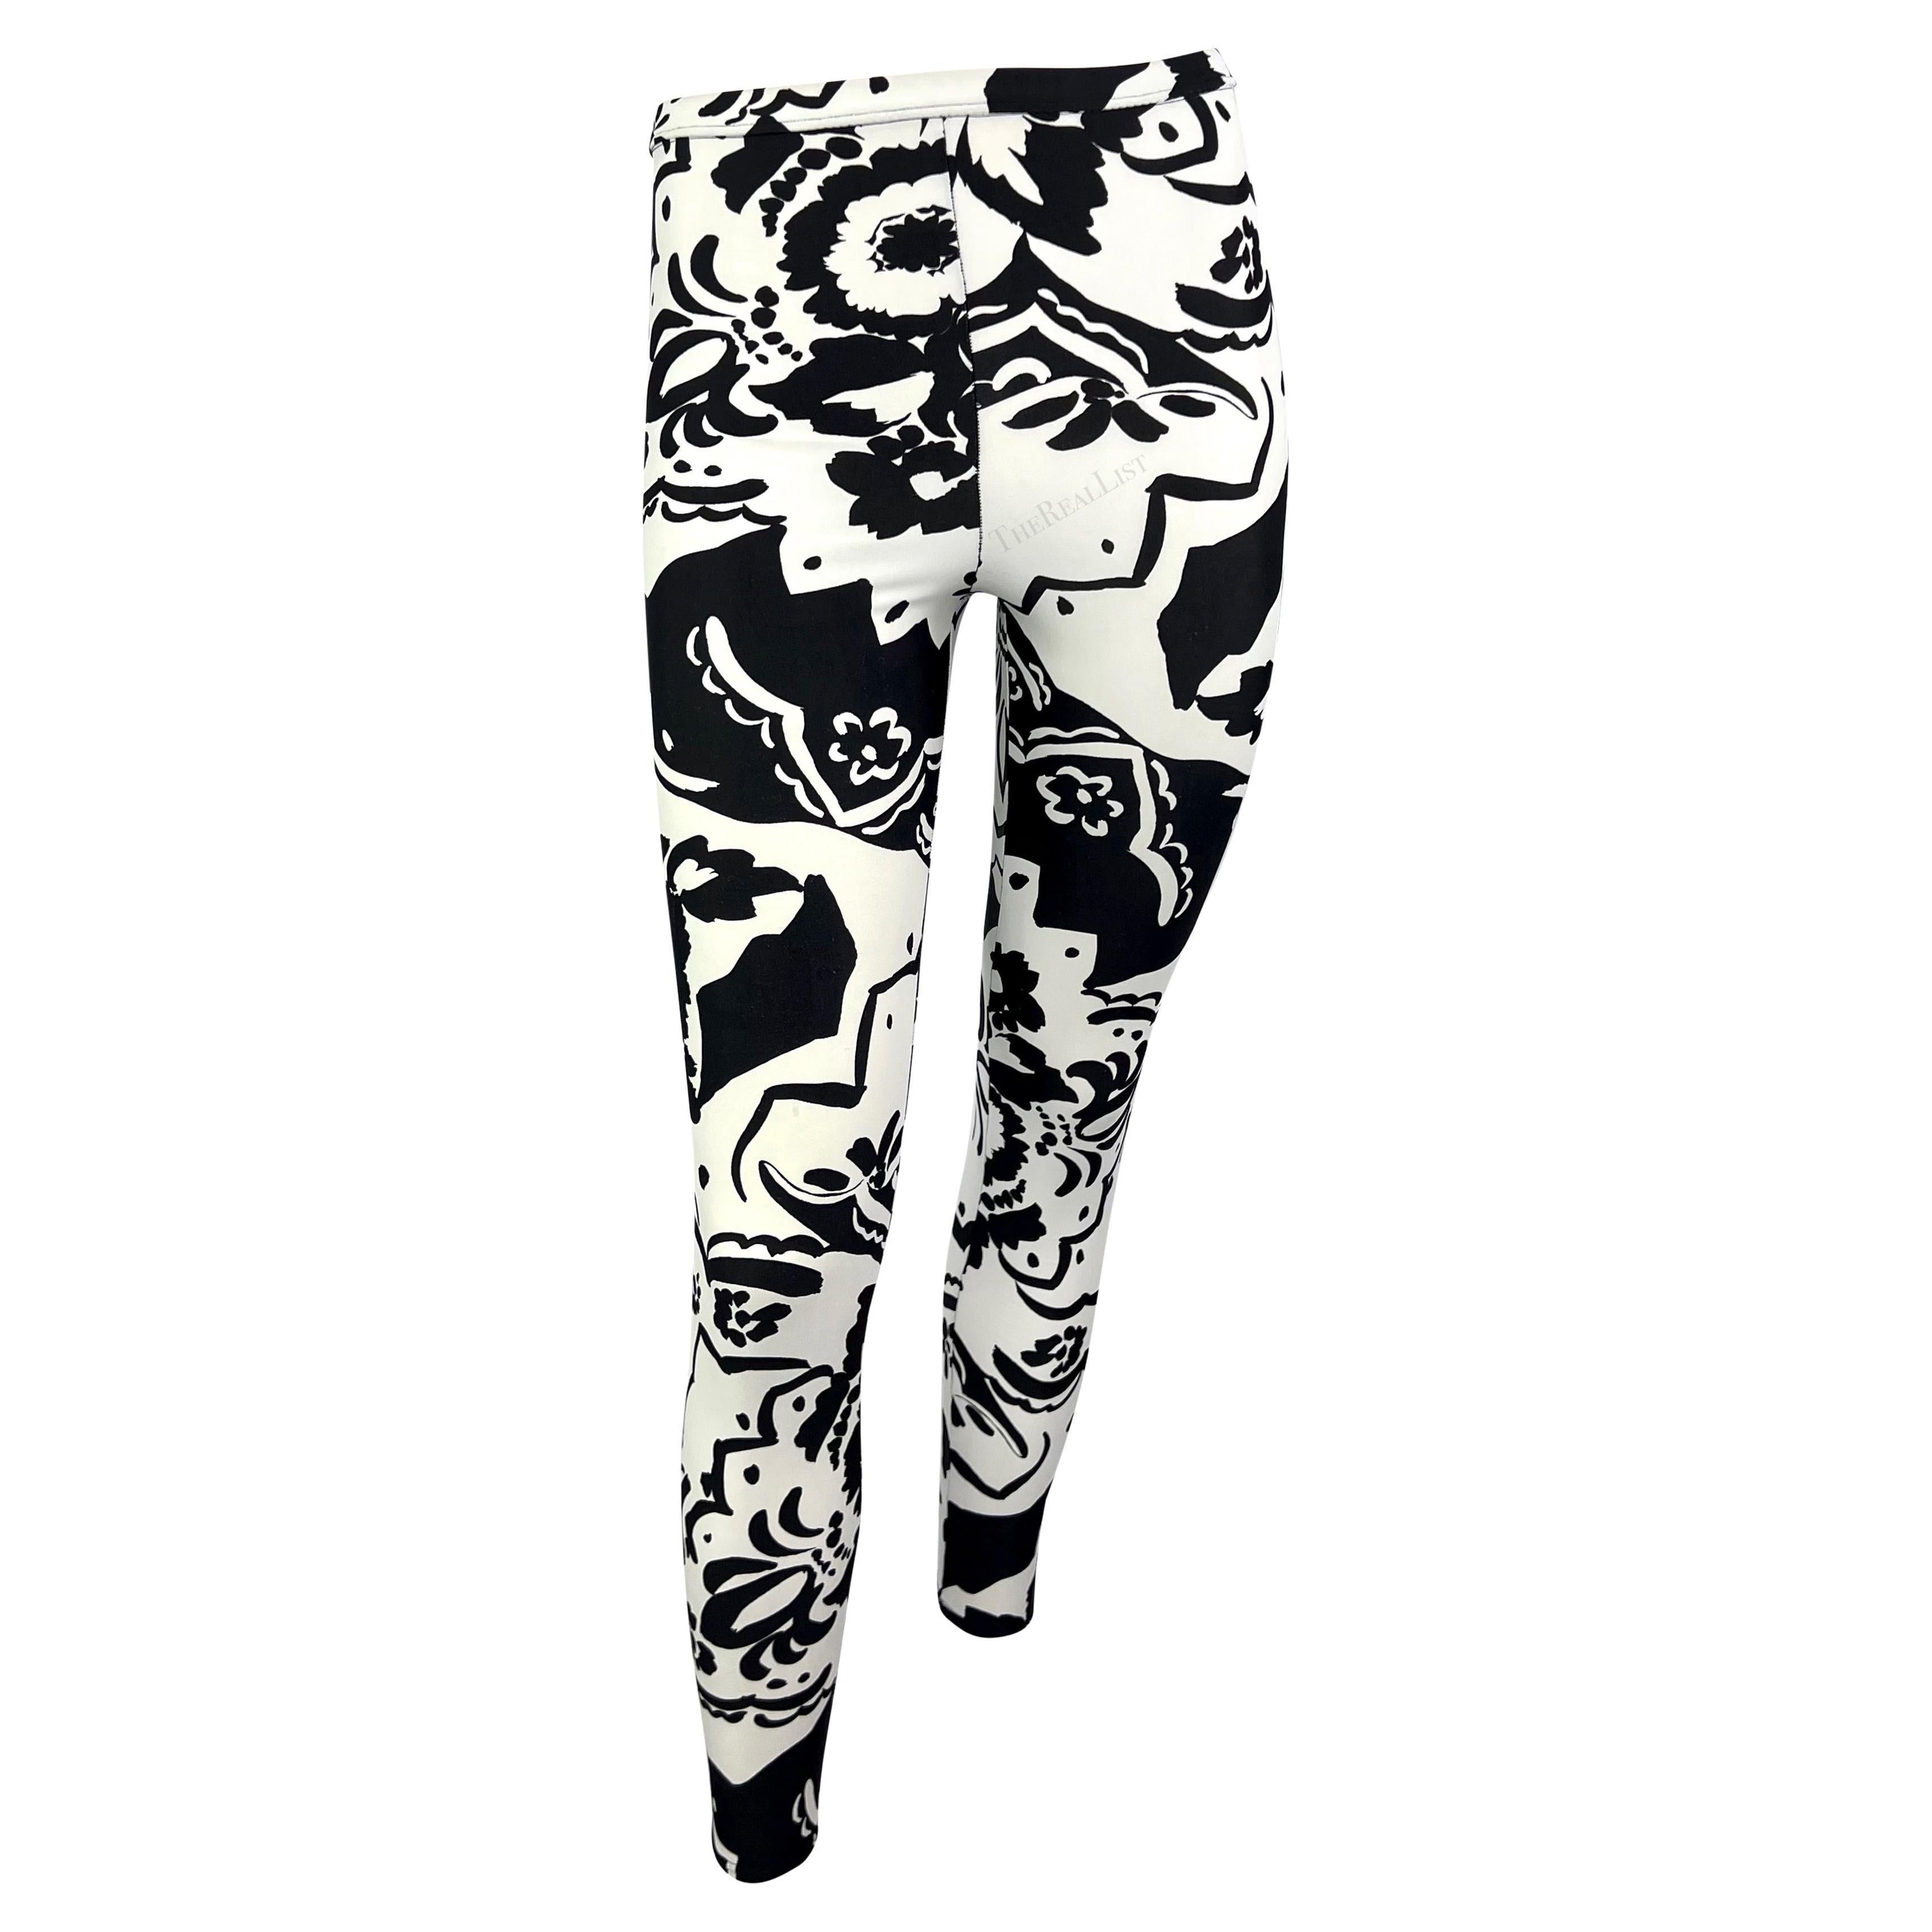 1990 Gianni Versace Black White Abstract Floral Leggings Tights For Sale